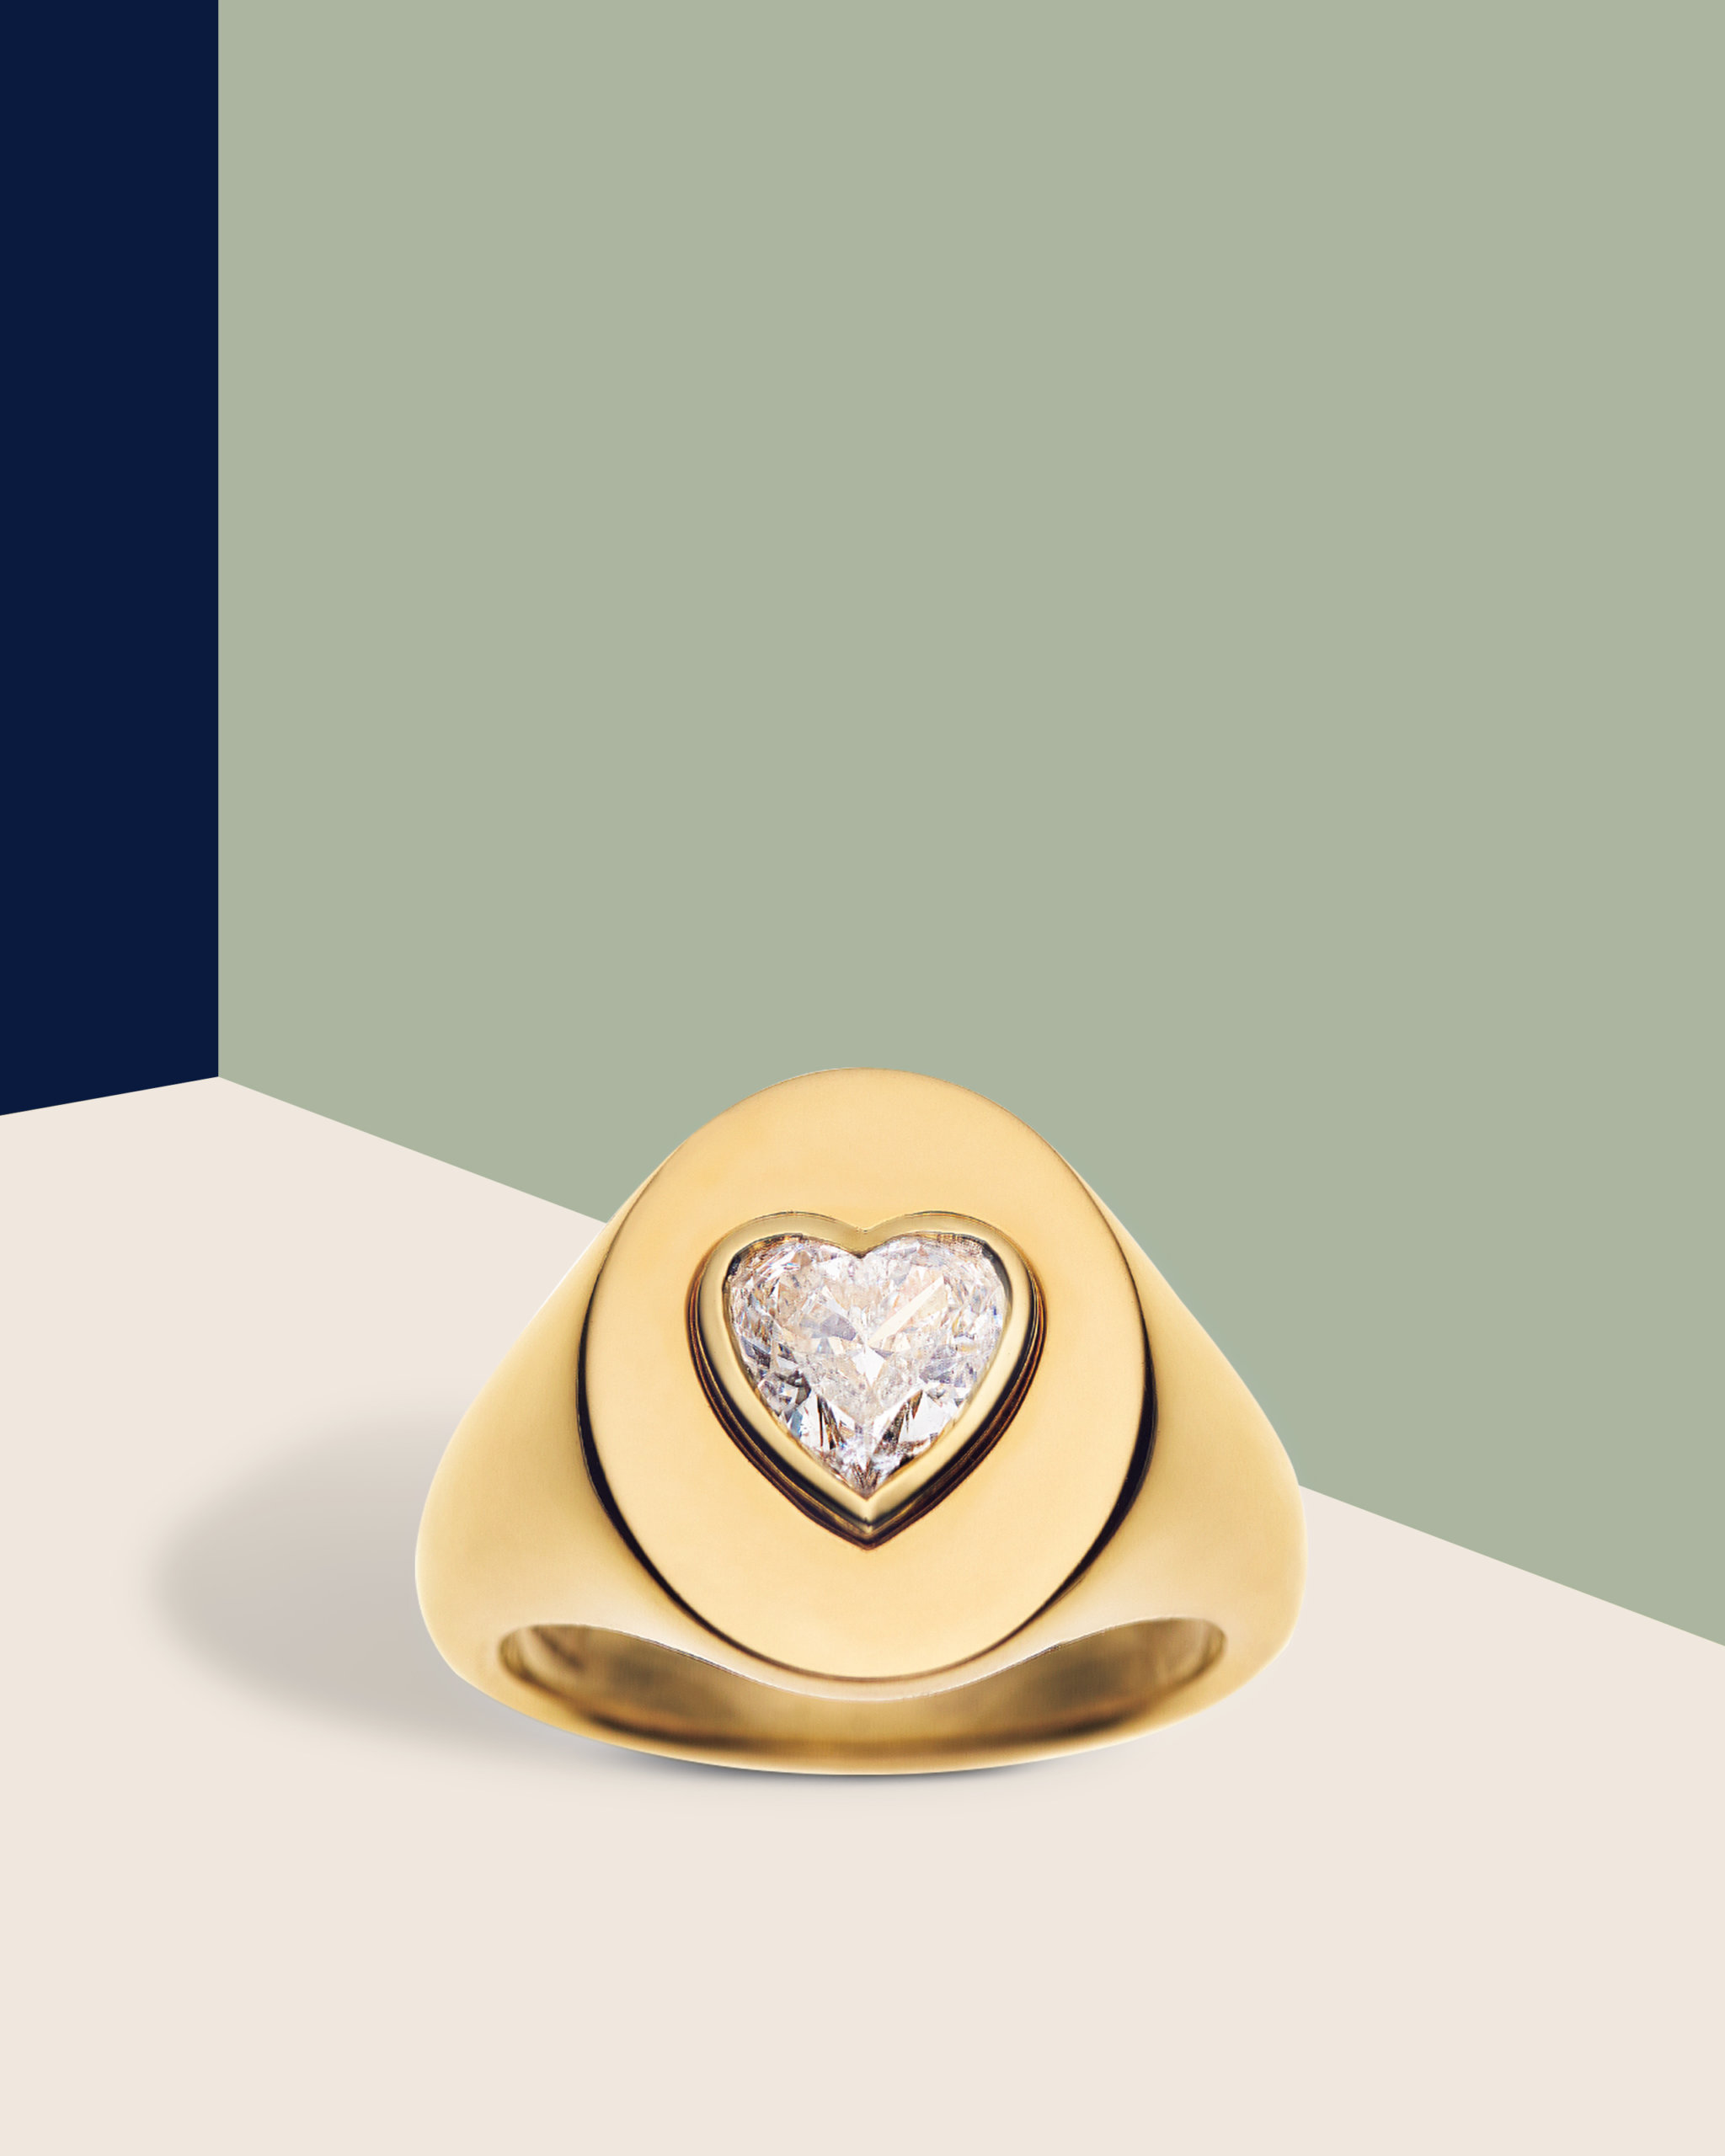 Gypsy set ring in yellow gold with a heart shaped diamond from Jemma Waynne